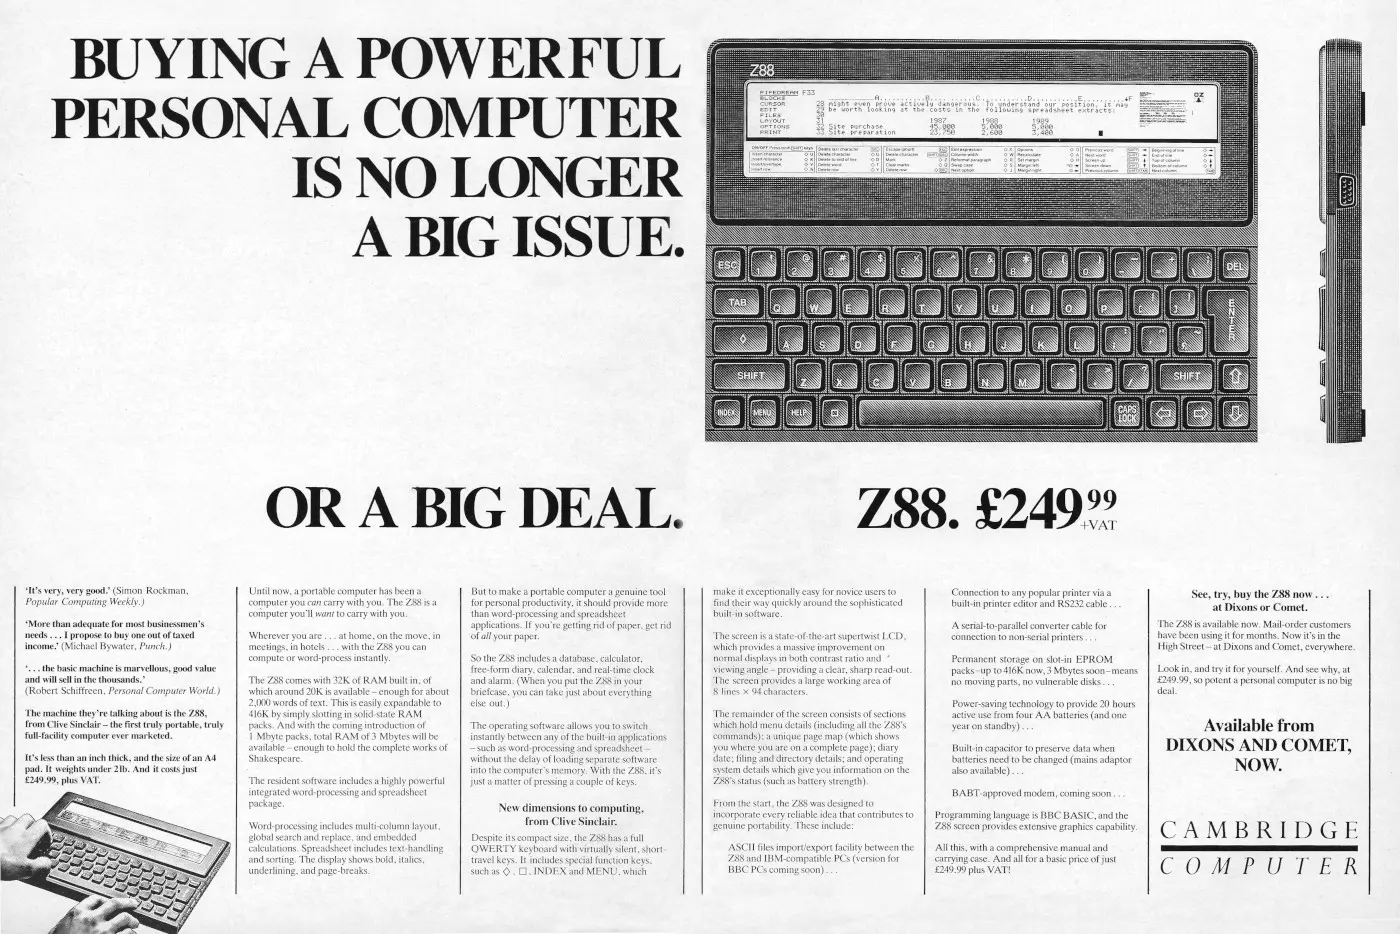 Cambridge Computer Advert: Z88: Buying a powerful personal computer is no longer a big issue.  Or a big deal., from Your Computer, November 1987